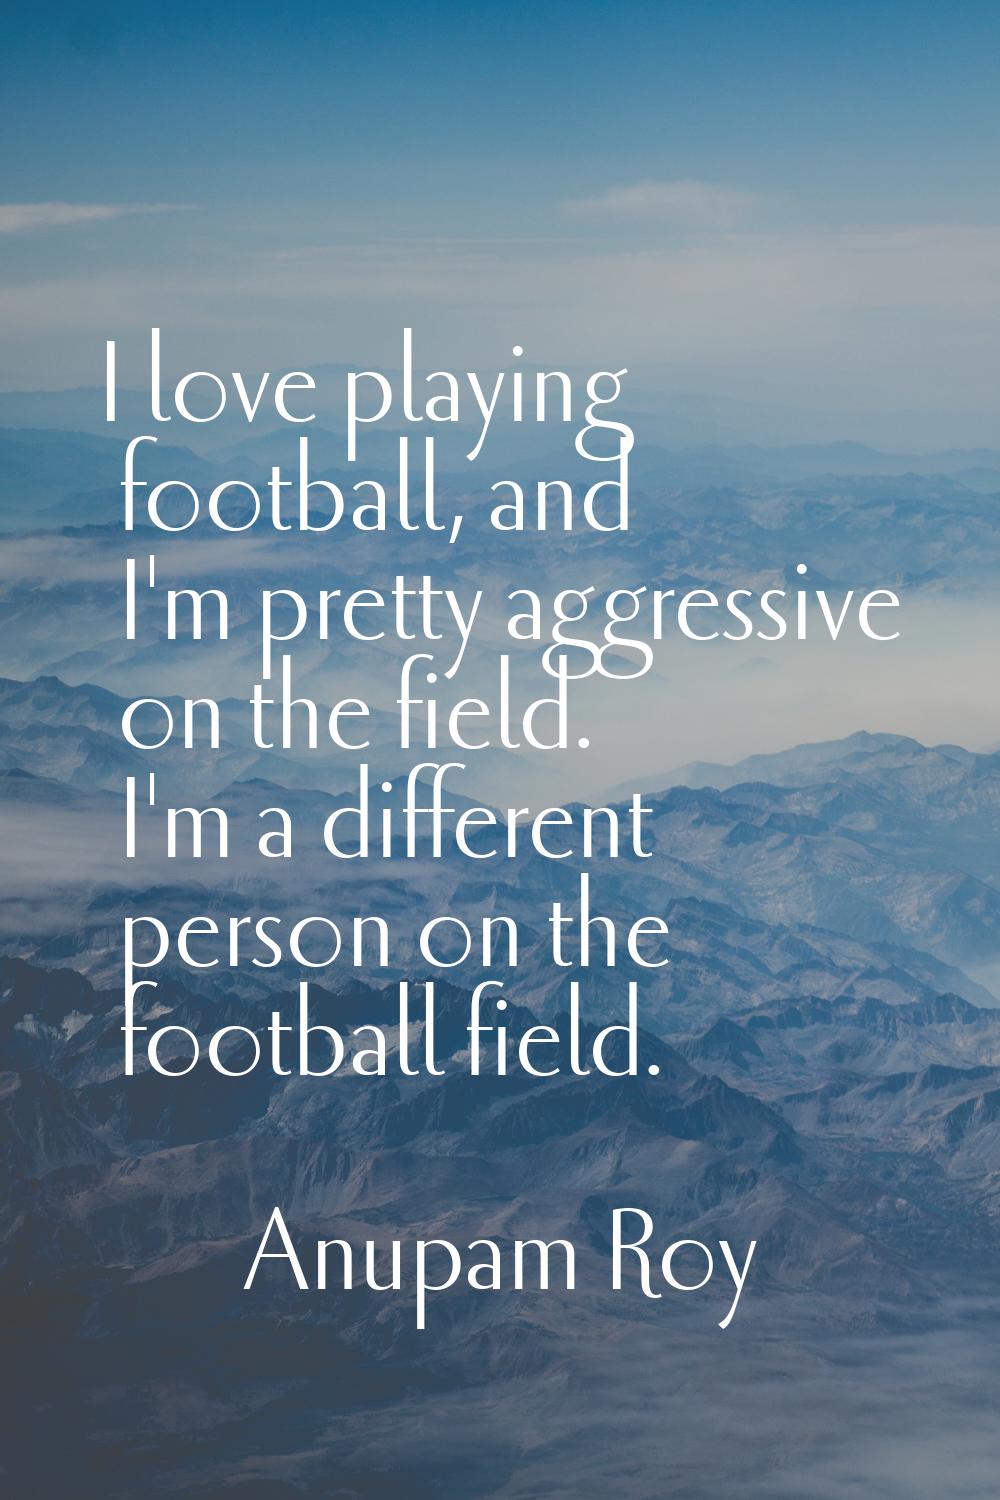 I love playing football, and I'm pretty aggressive on the field. I'm a different person on the foot